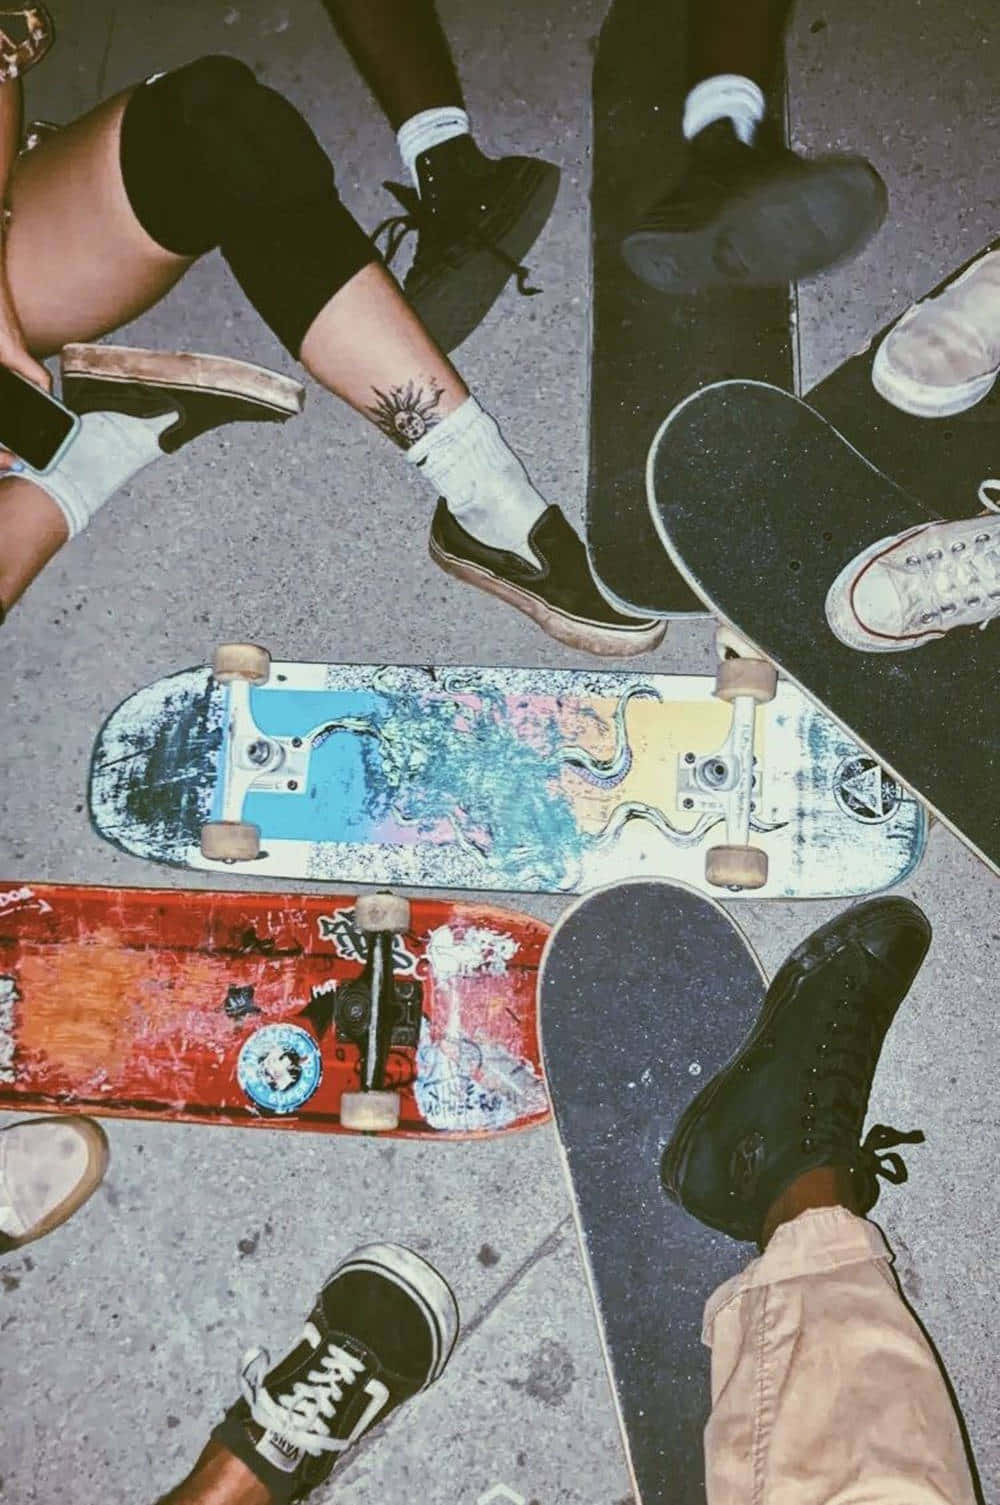 People standing around with their skateboards - Skater, skate